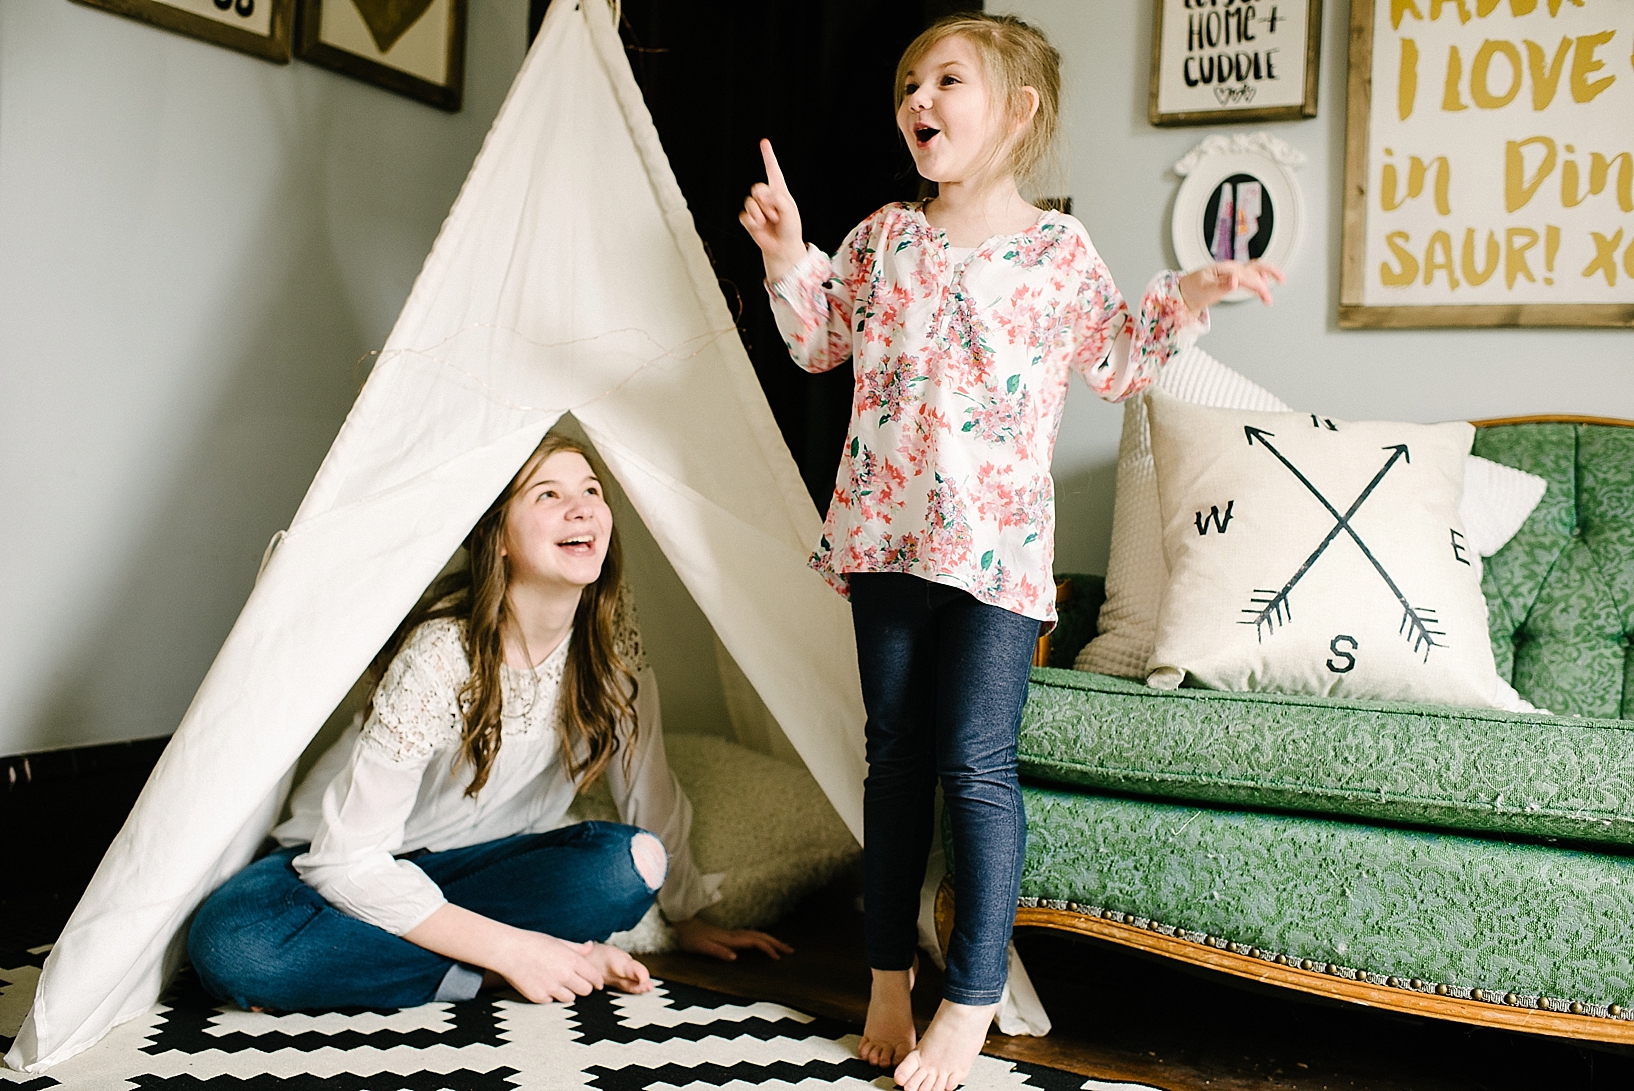 sisters playing in teepee in eclectic living room